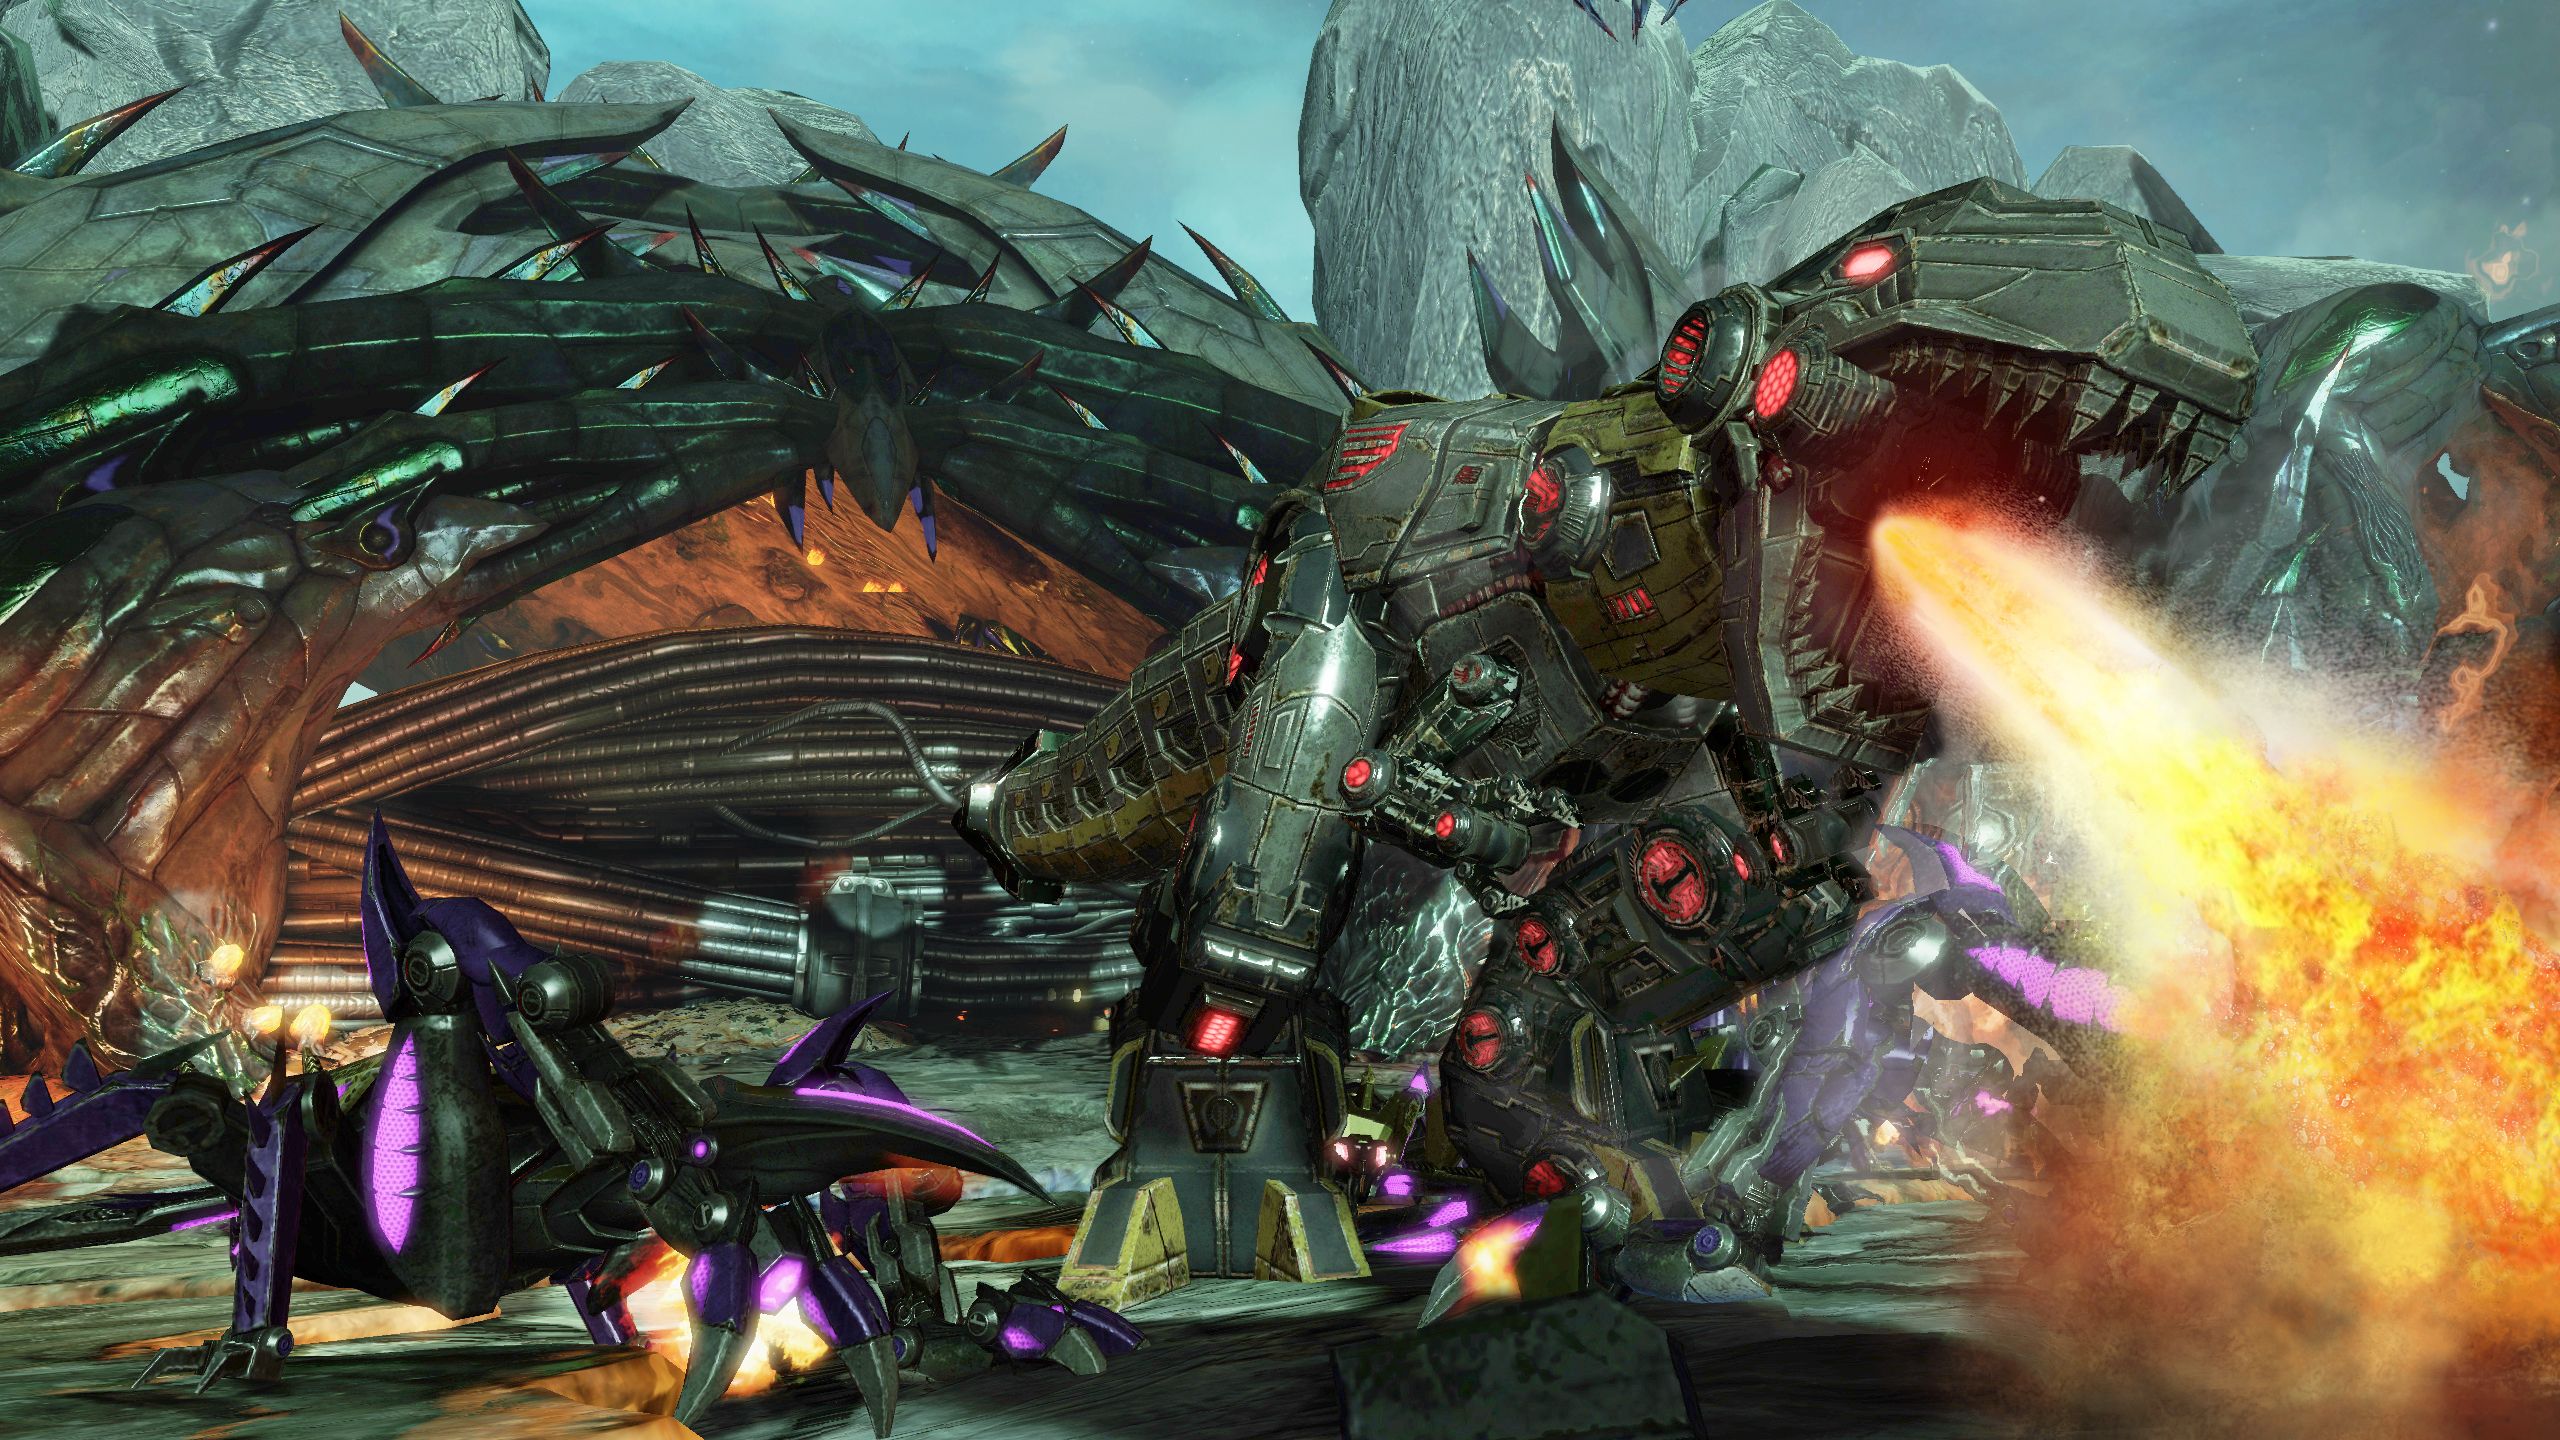 Transformers Fall of Cybertron - Grimlock fire breathing attack